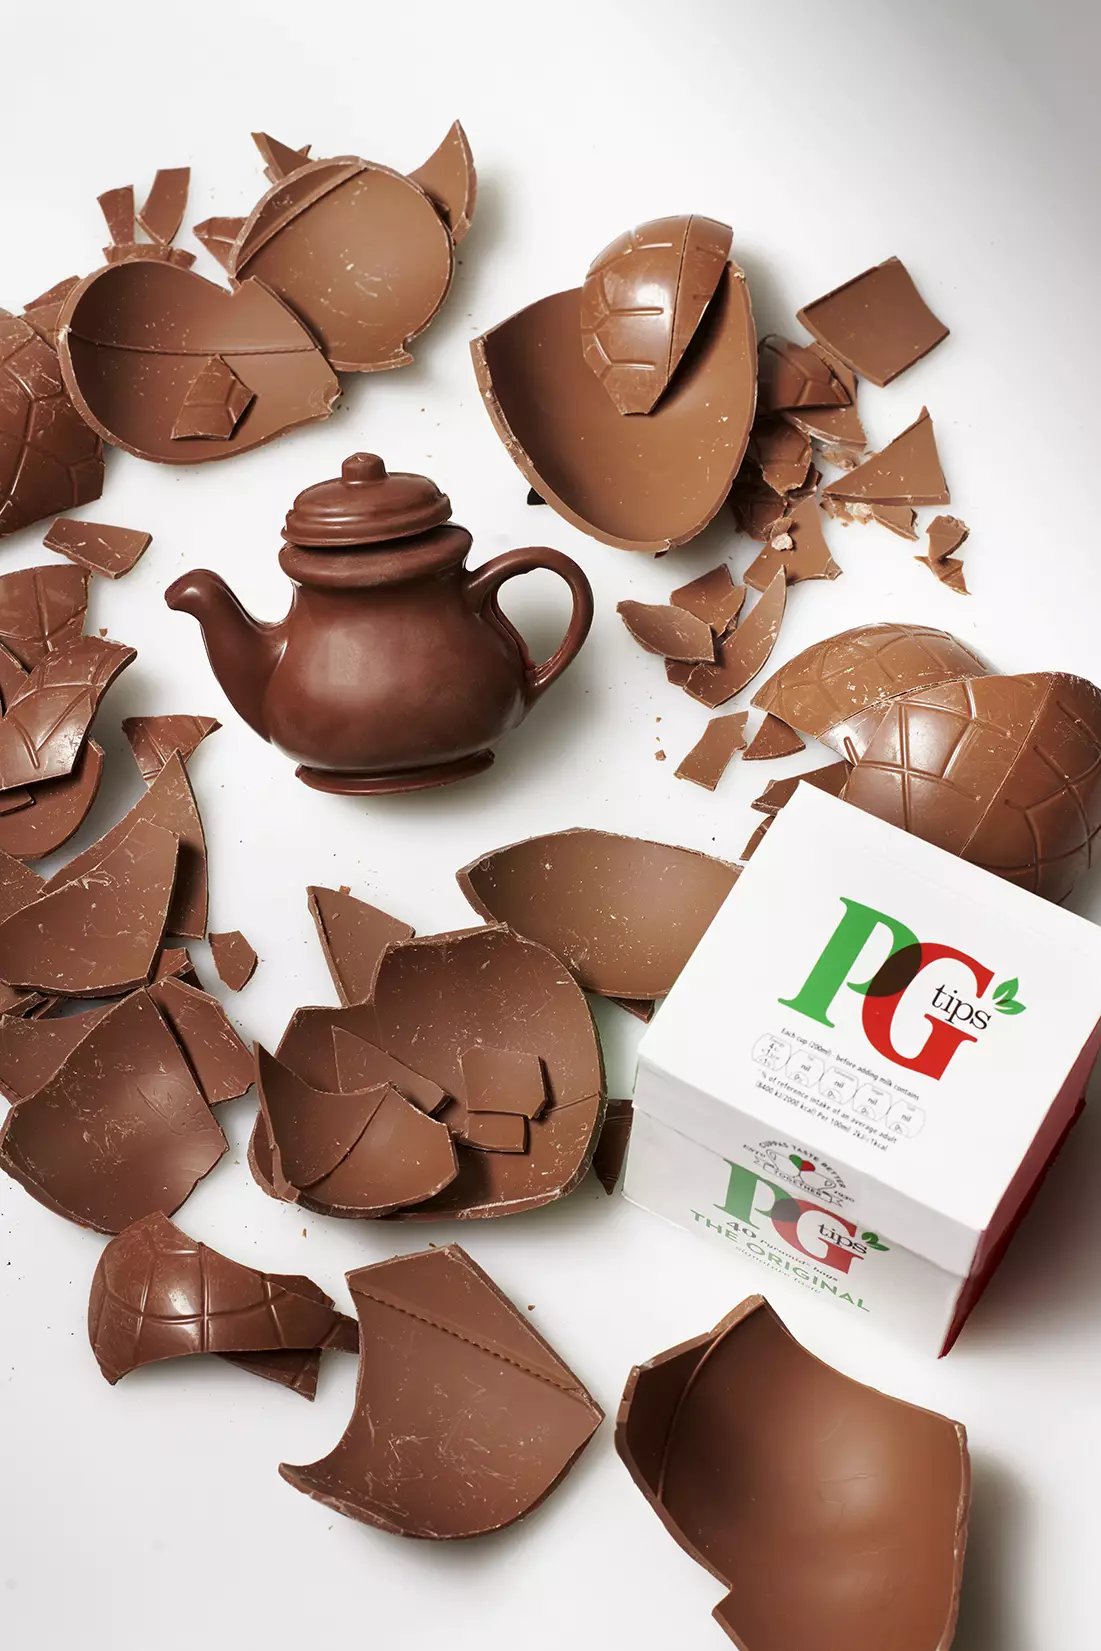 PG Tips is selling an actual chocolate teapot for Easter (